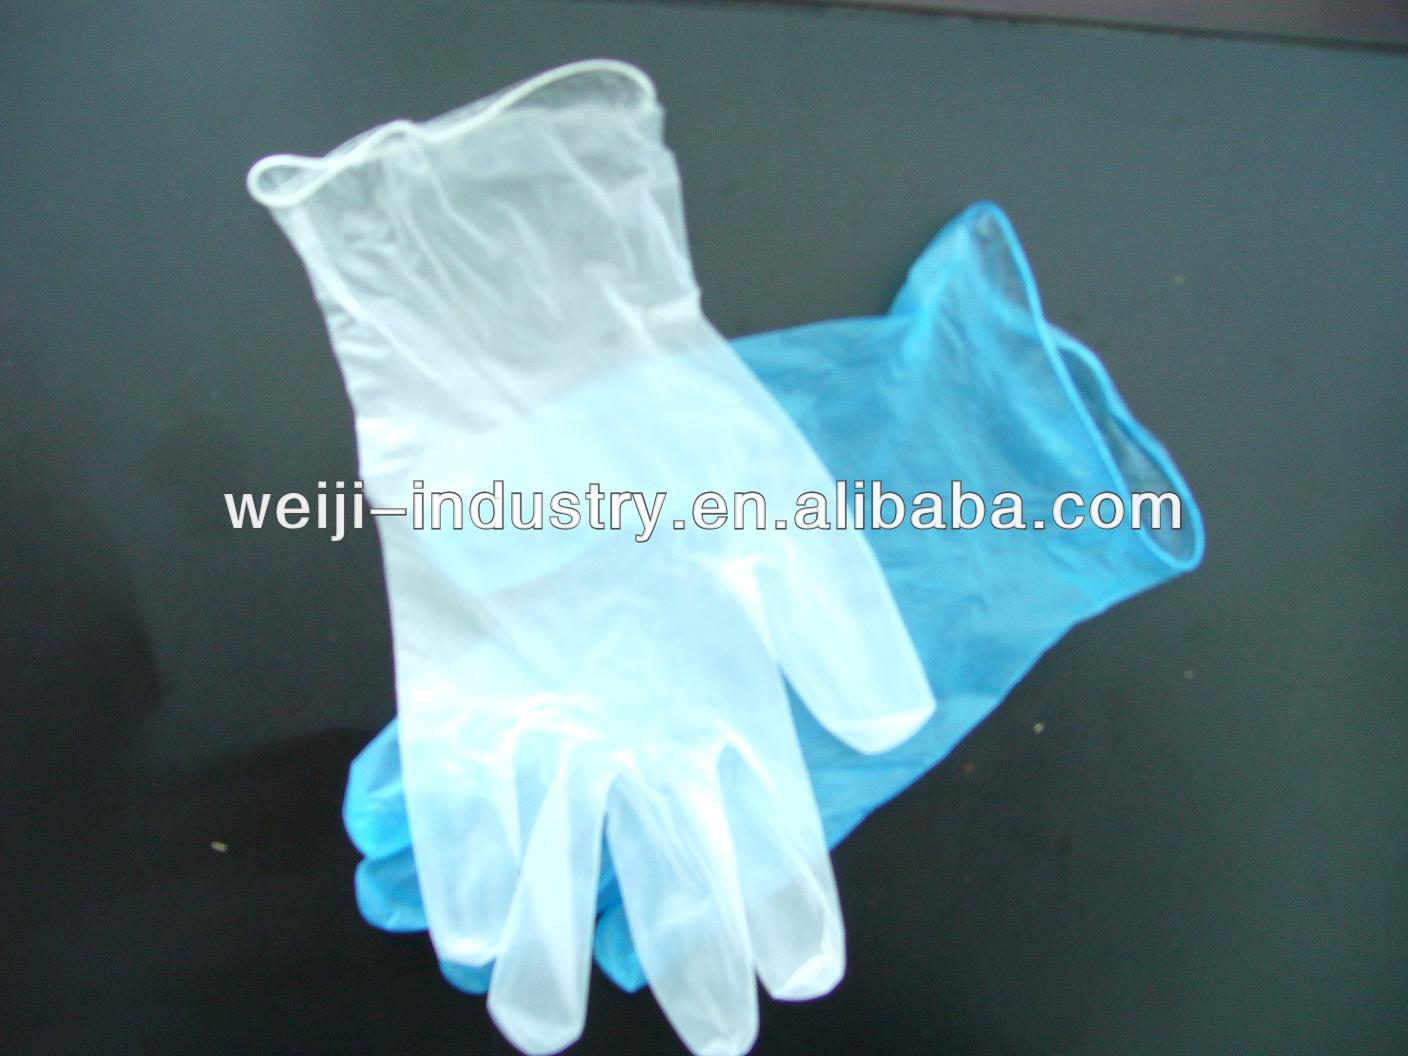 CE,FDA,ISO approved AQL1.5,2.5,4.0 latex gloves wholesale/medical,dental,surgical,laboratory,examination,food service